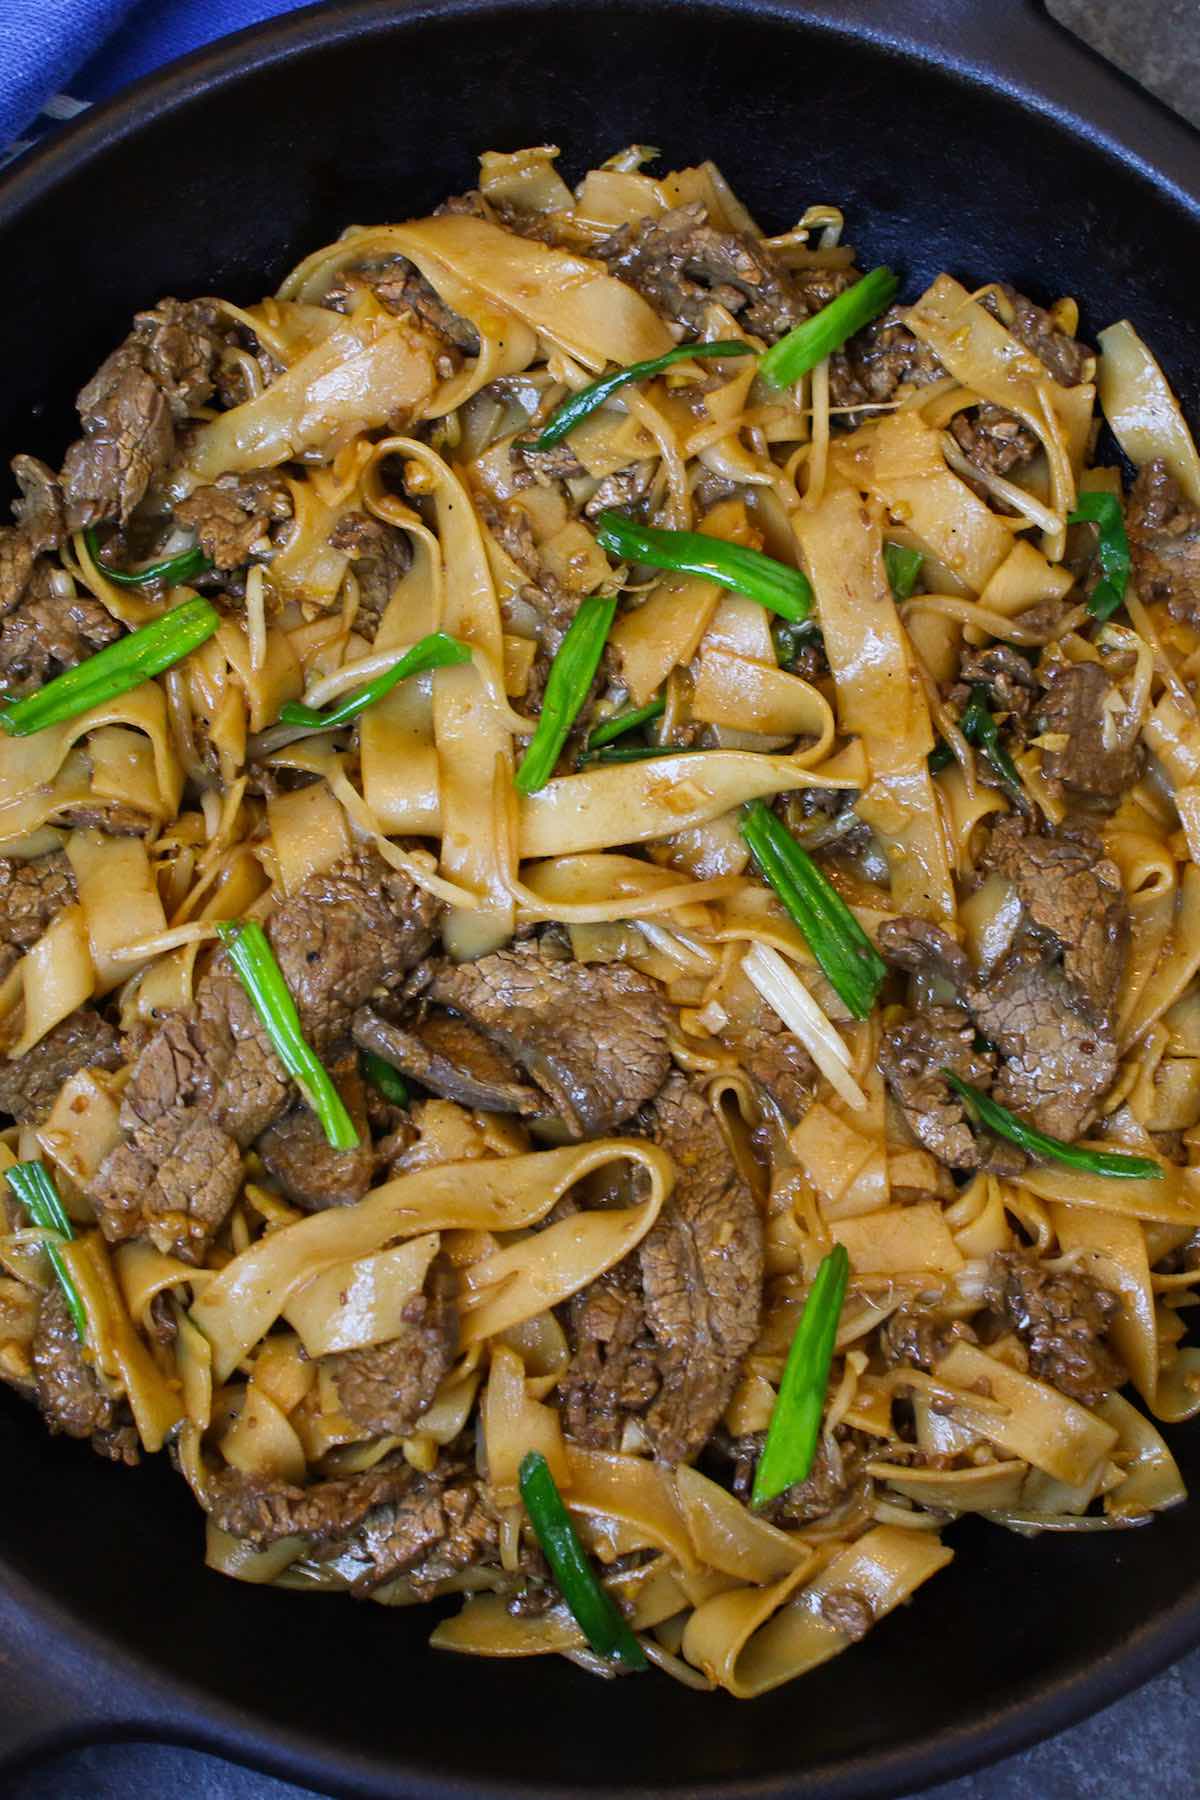 Beef chow fun noodles in a wok after being prepared showing tender strips of beef and fresh green onions for garnish